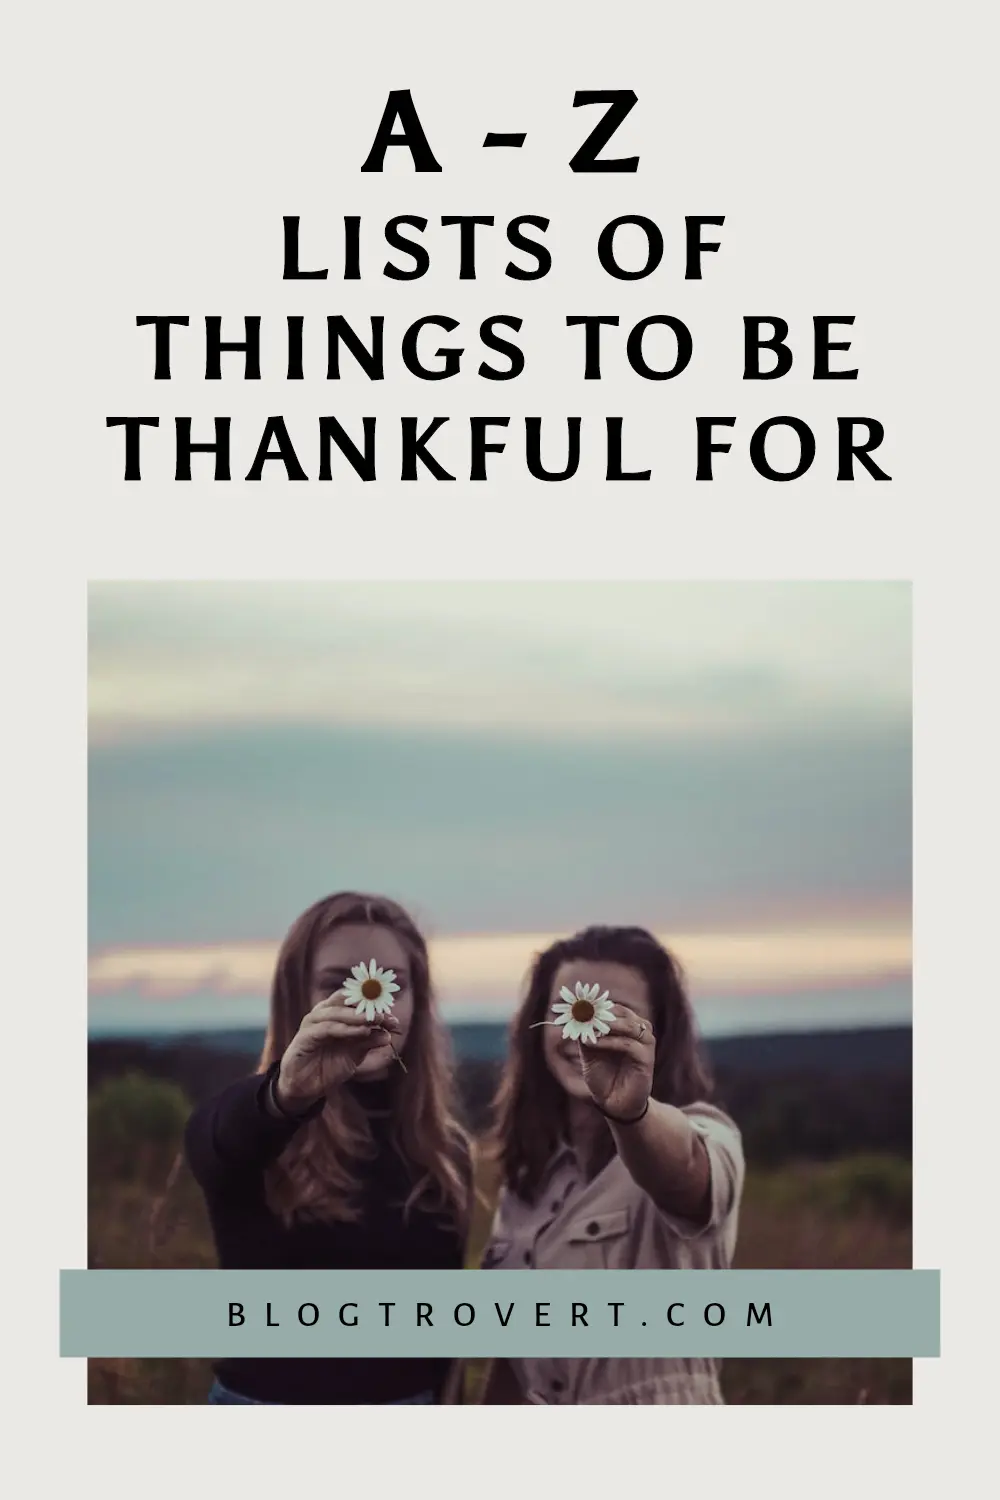 A-Z Unique Gratitude List Ideas - 100 things to be thankful for everyday 3